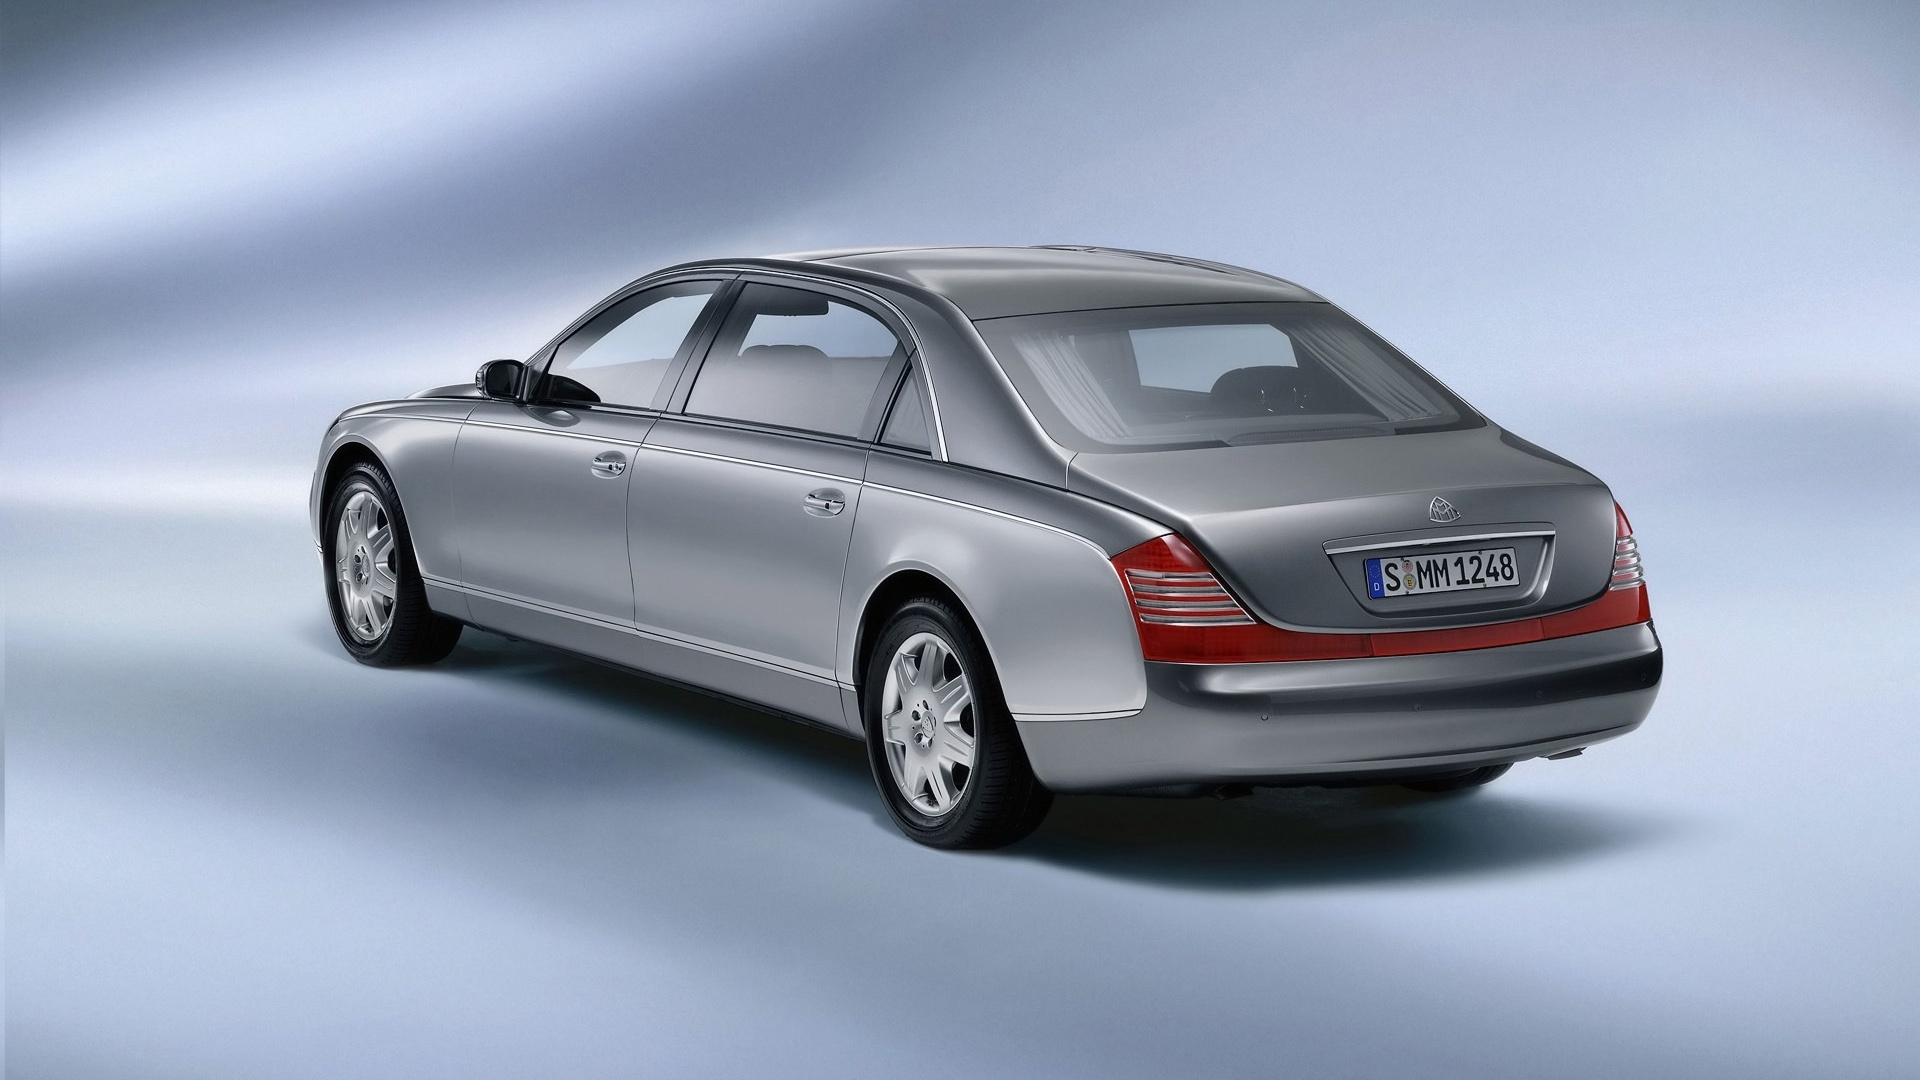 Maybach 62 Rear for 1920 x 1080 HDTV 1080p resolution